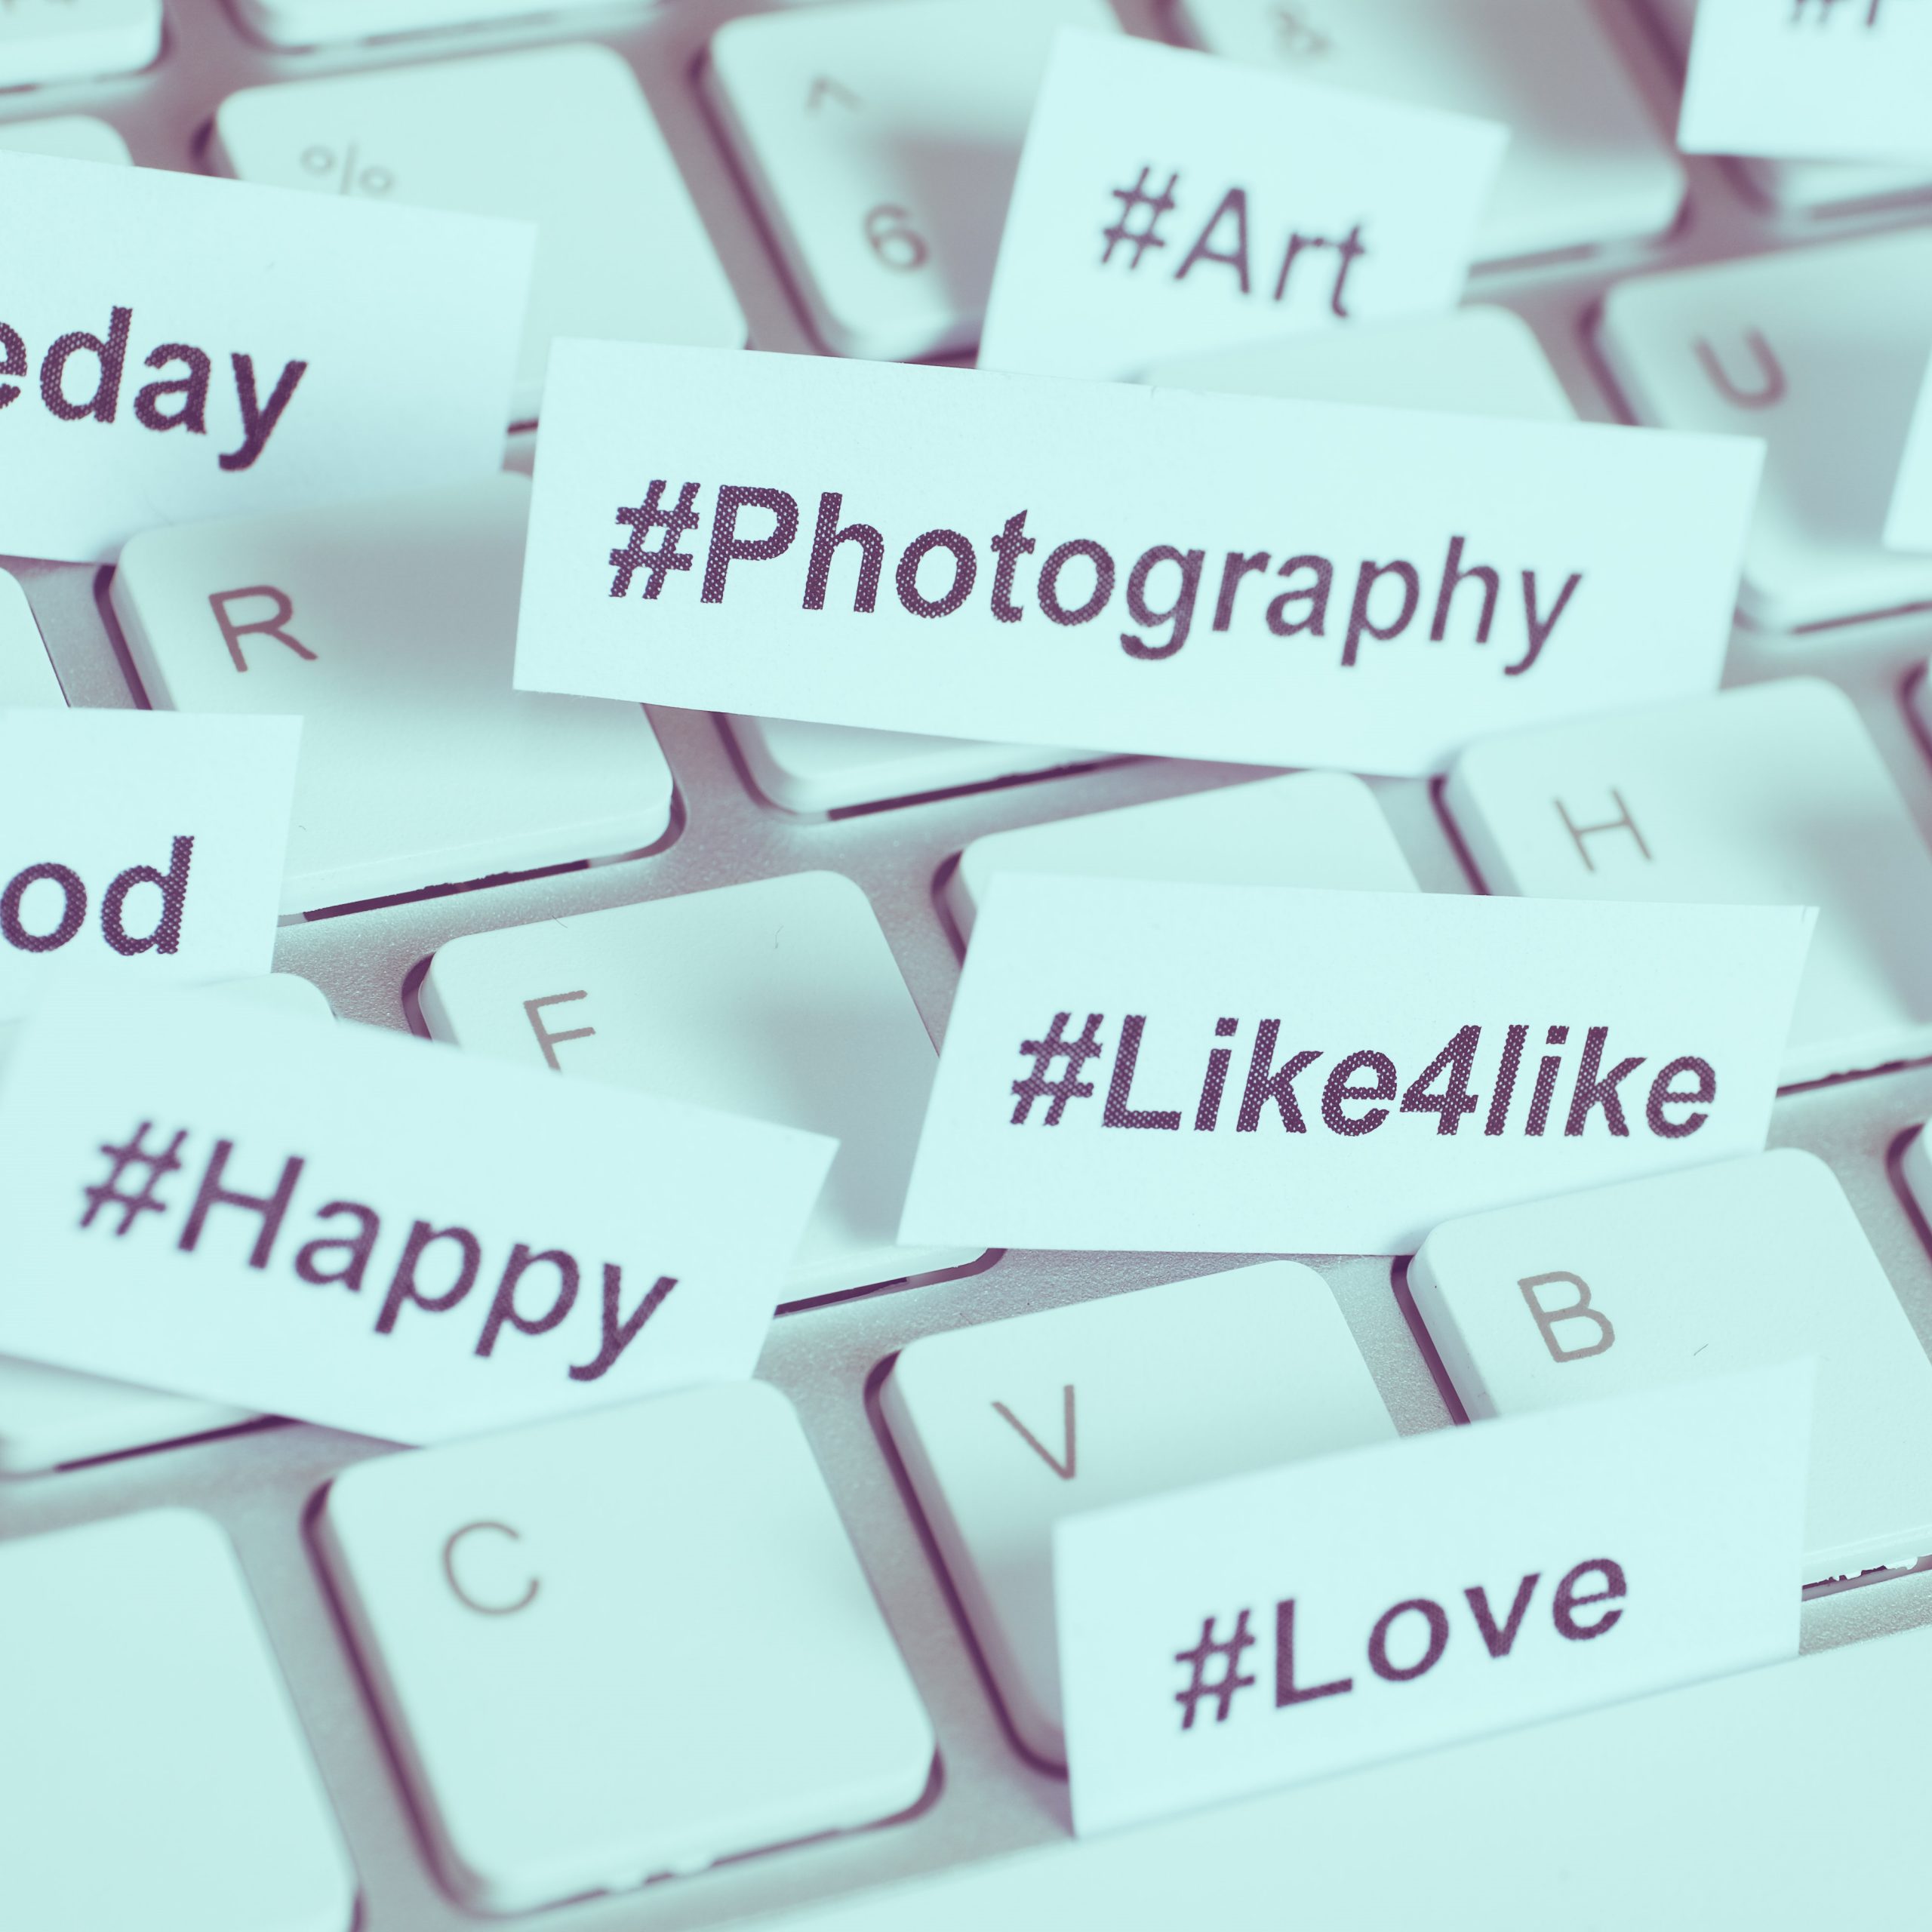 10 Mistakes to Avoid On Your Professional Social Media